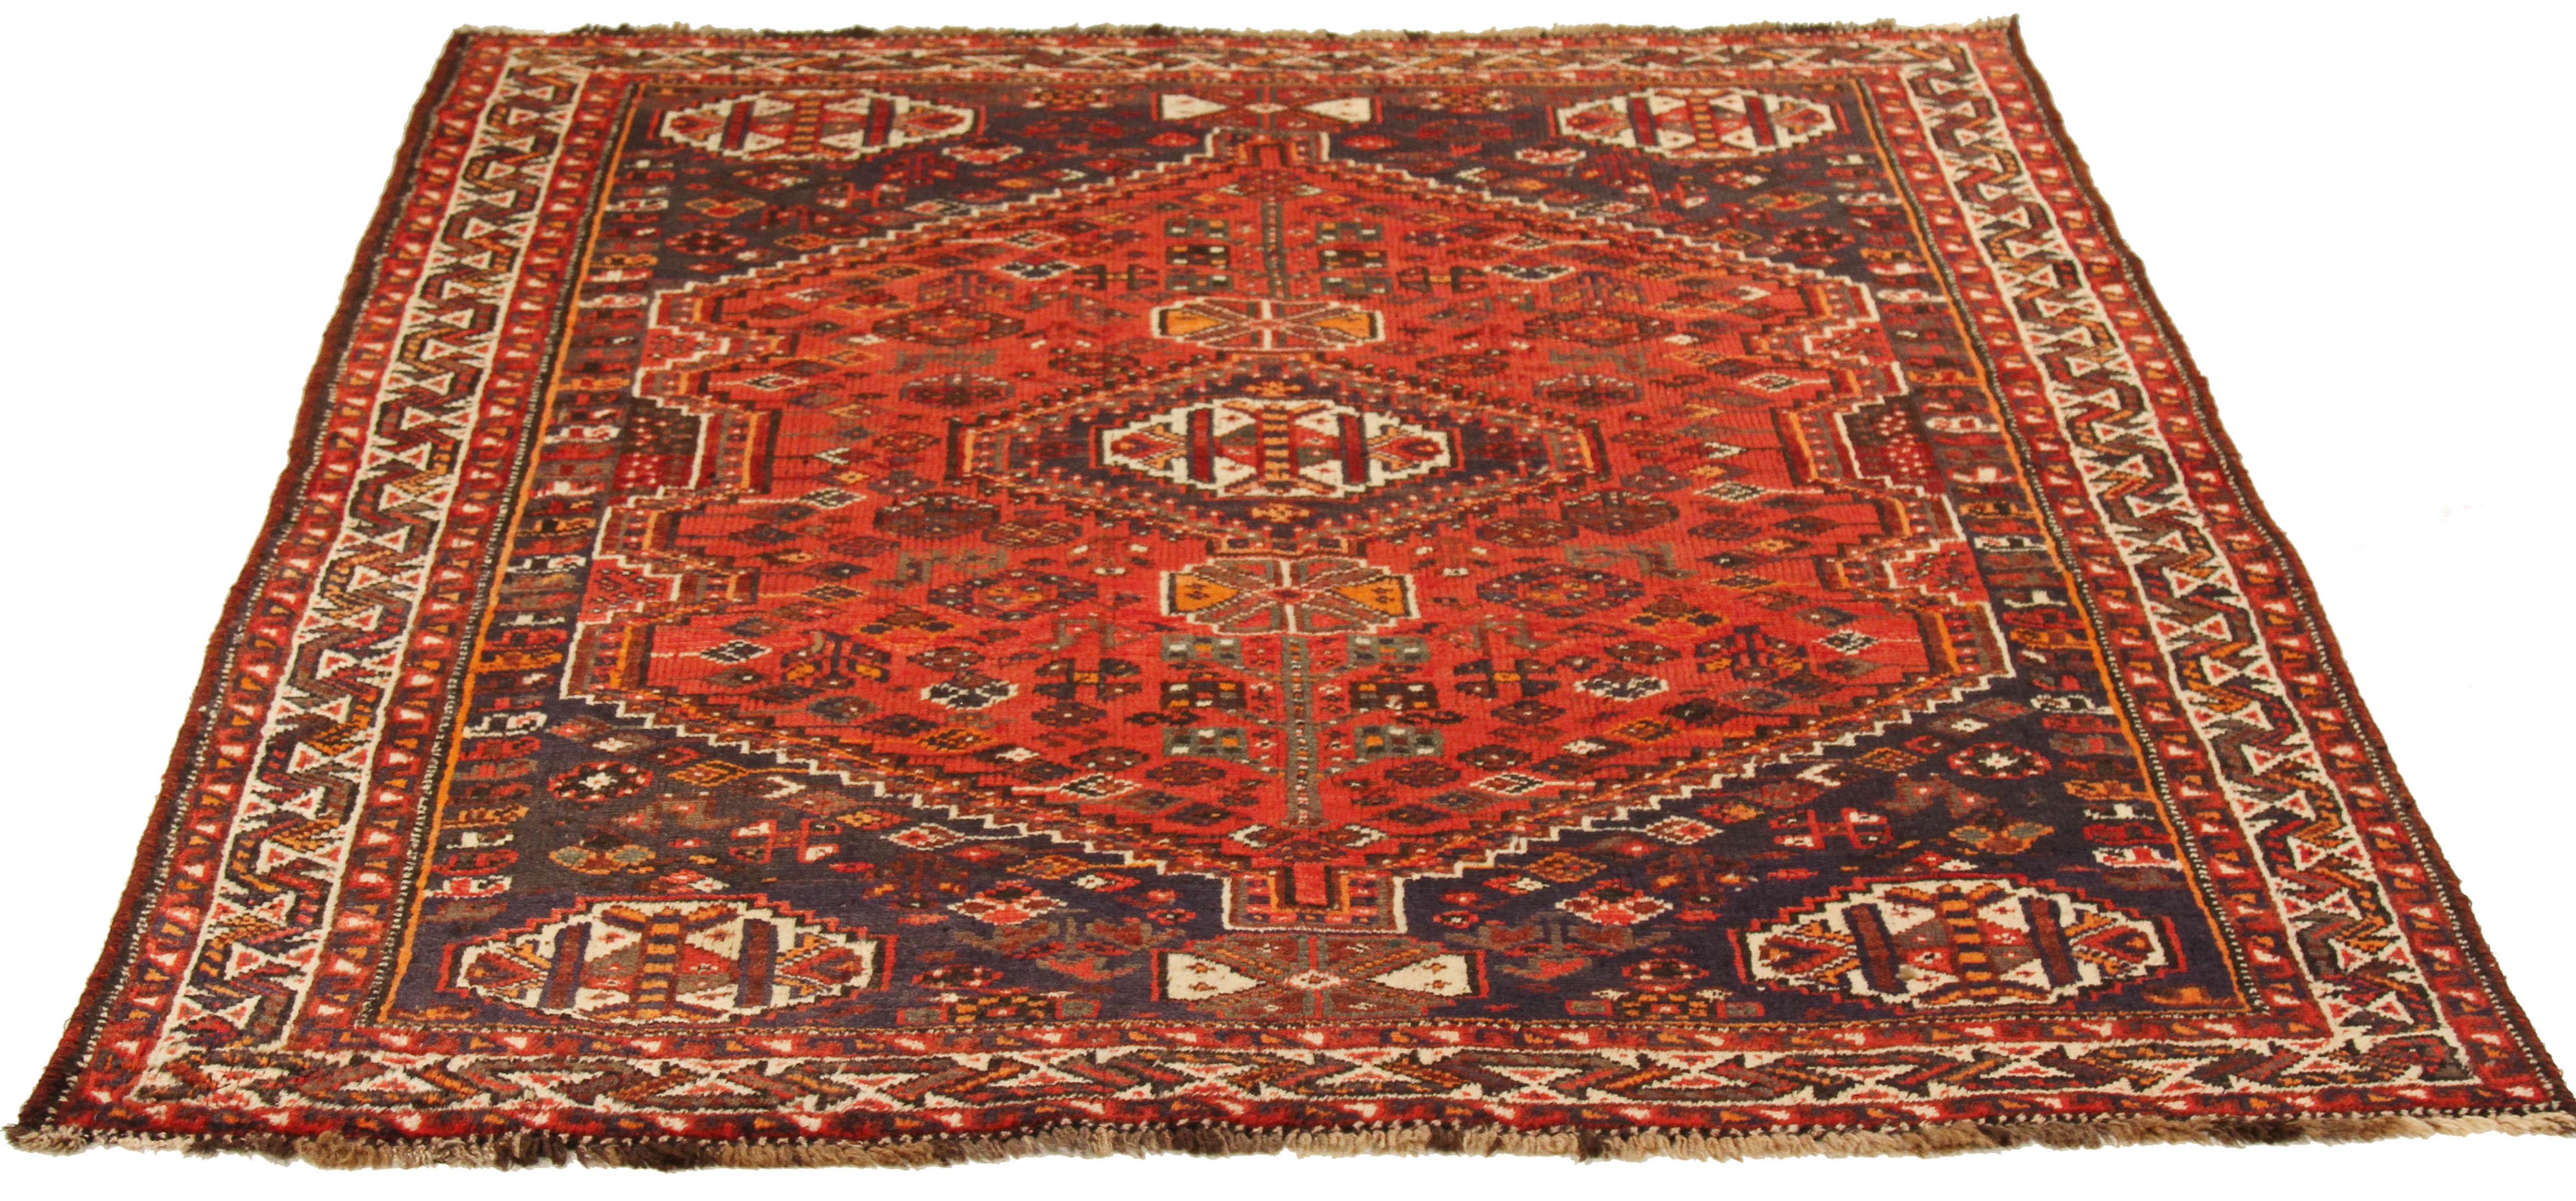 Antique Persian rug handwoven from the finest sheep’s wool and colored with all-natural vegetable dyes that are safe for humans and pets. It’s a traditional Shiraz design featuring red and white geometric details over a black and navy field. It’s a